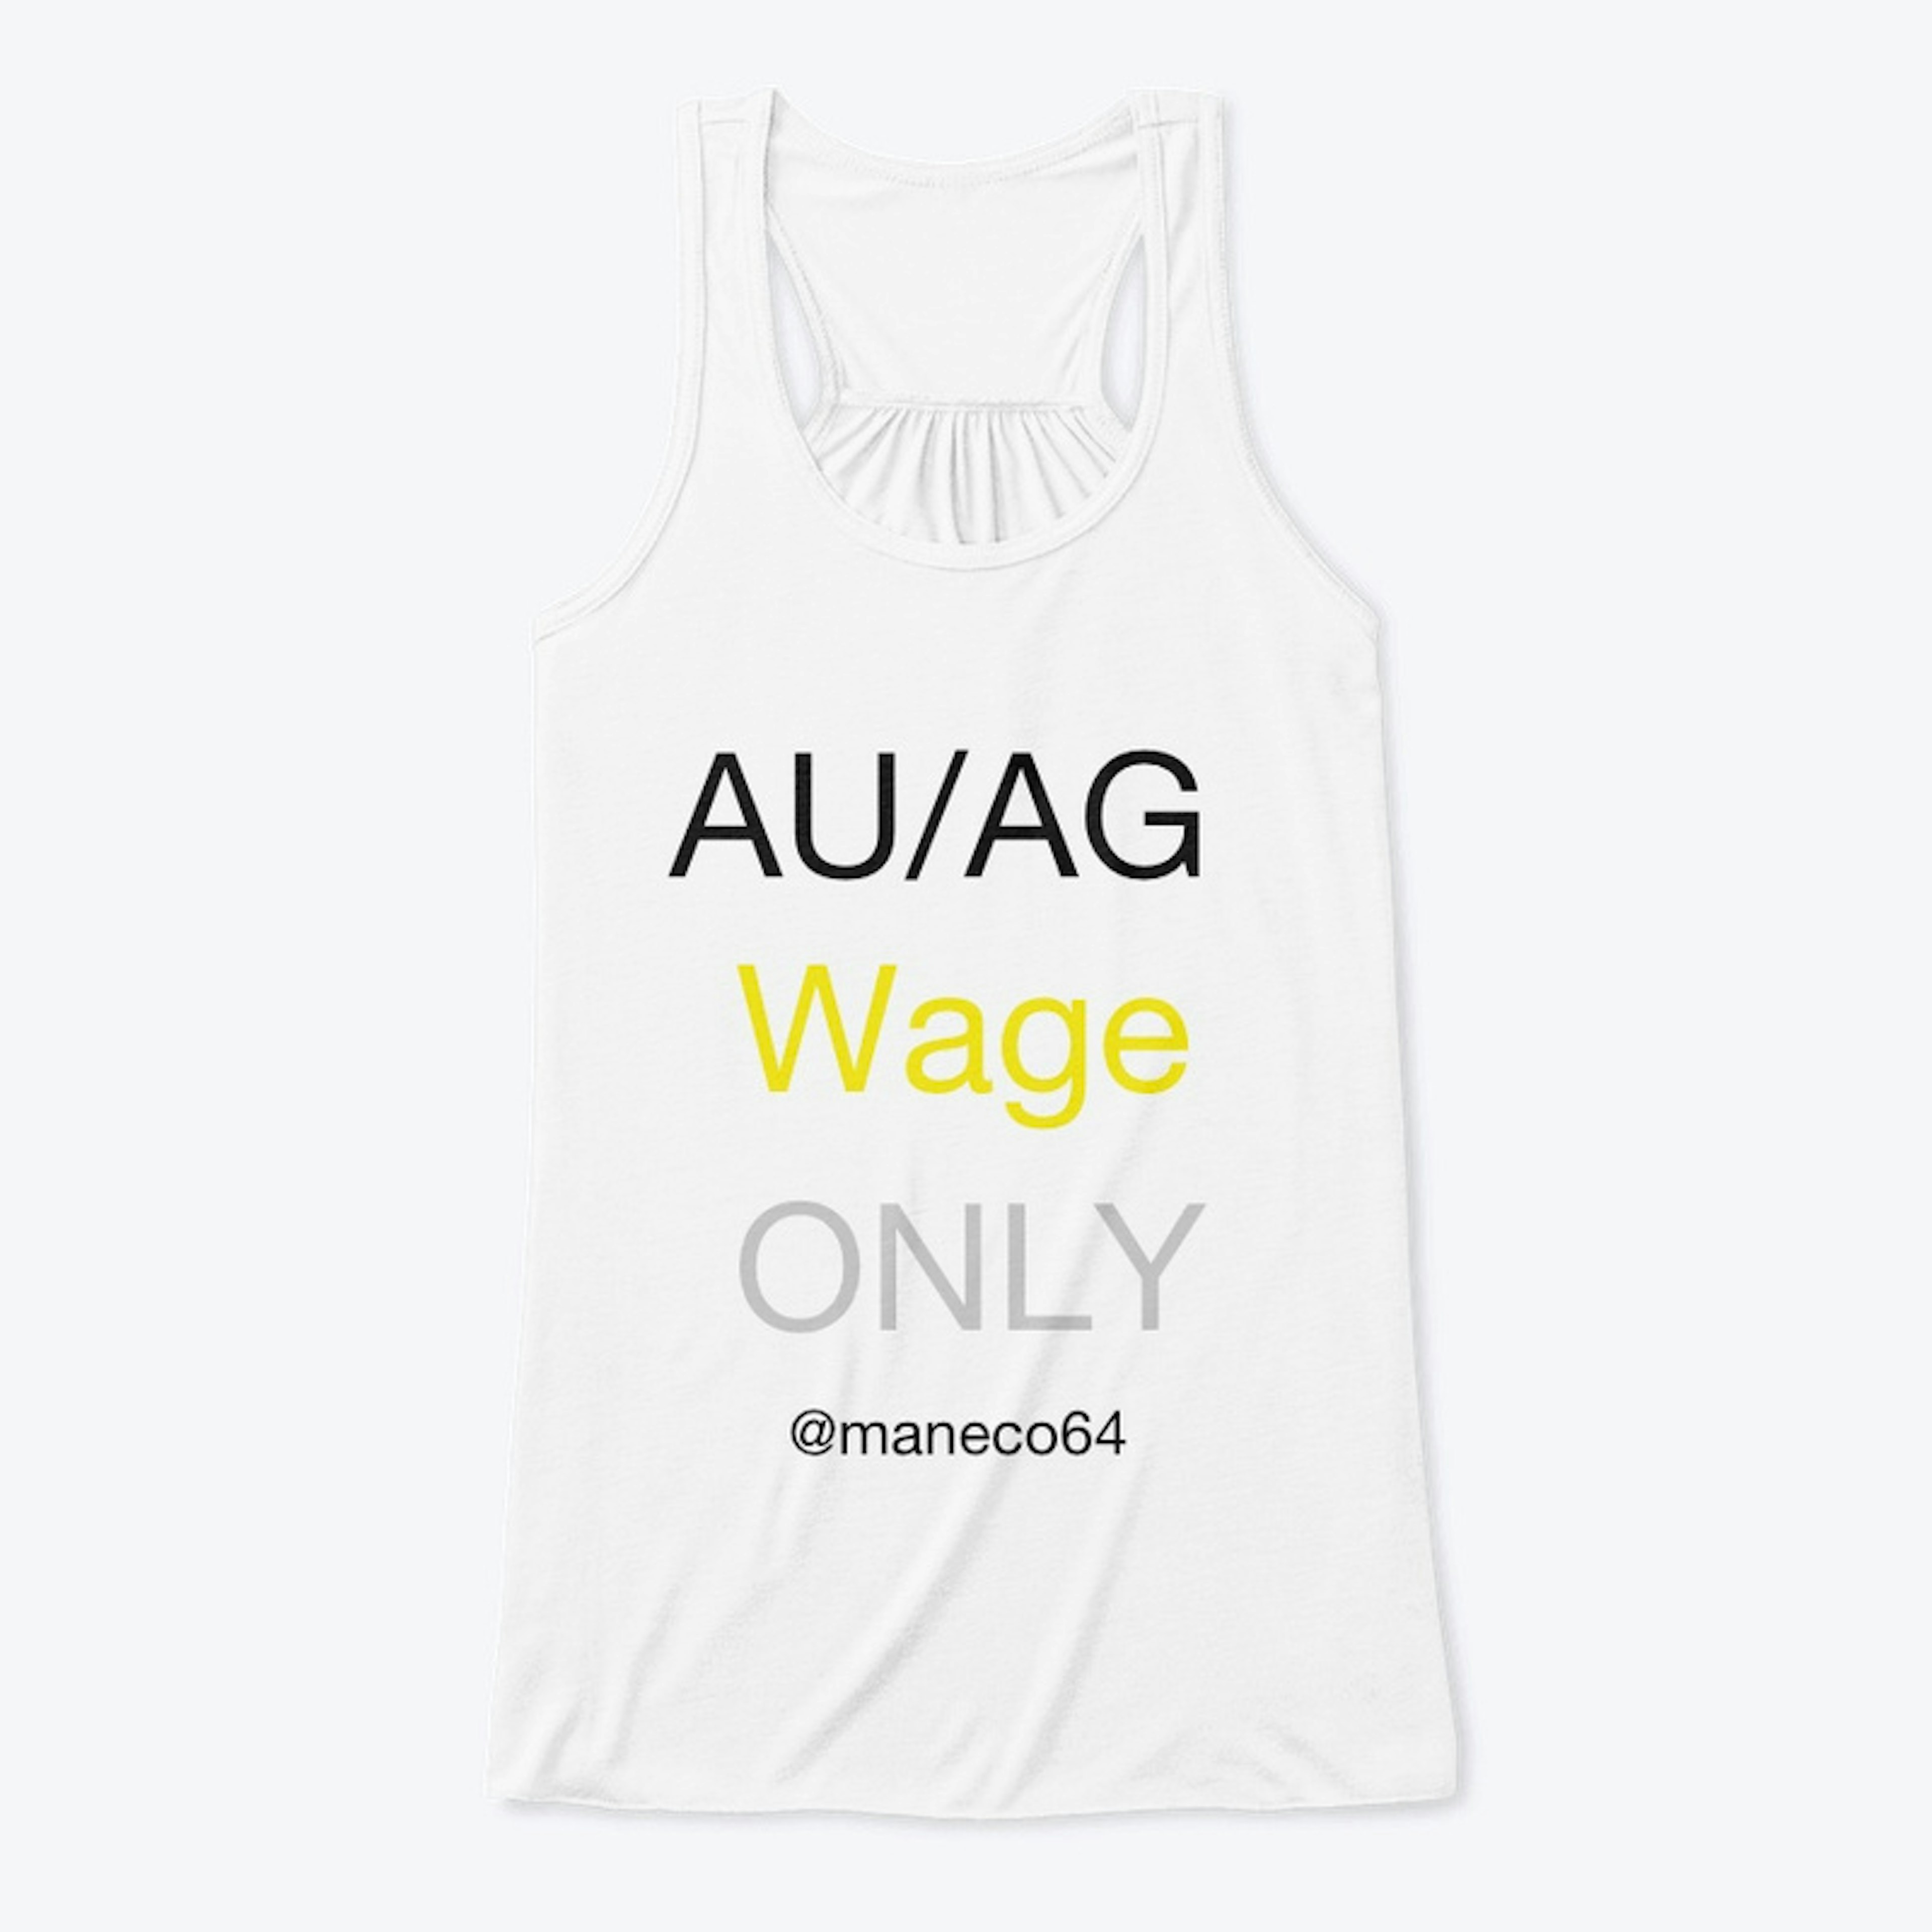 AU/AG Wage ONLY